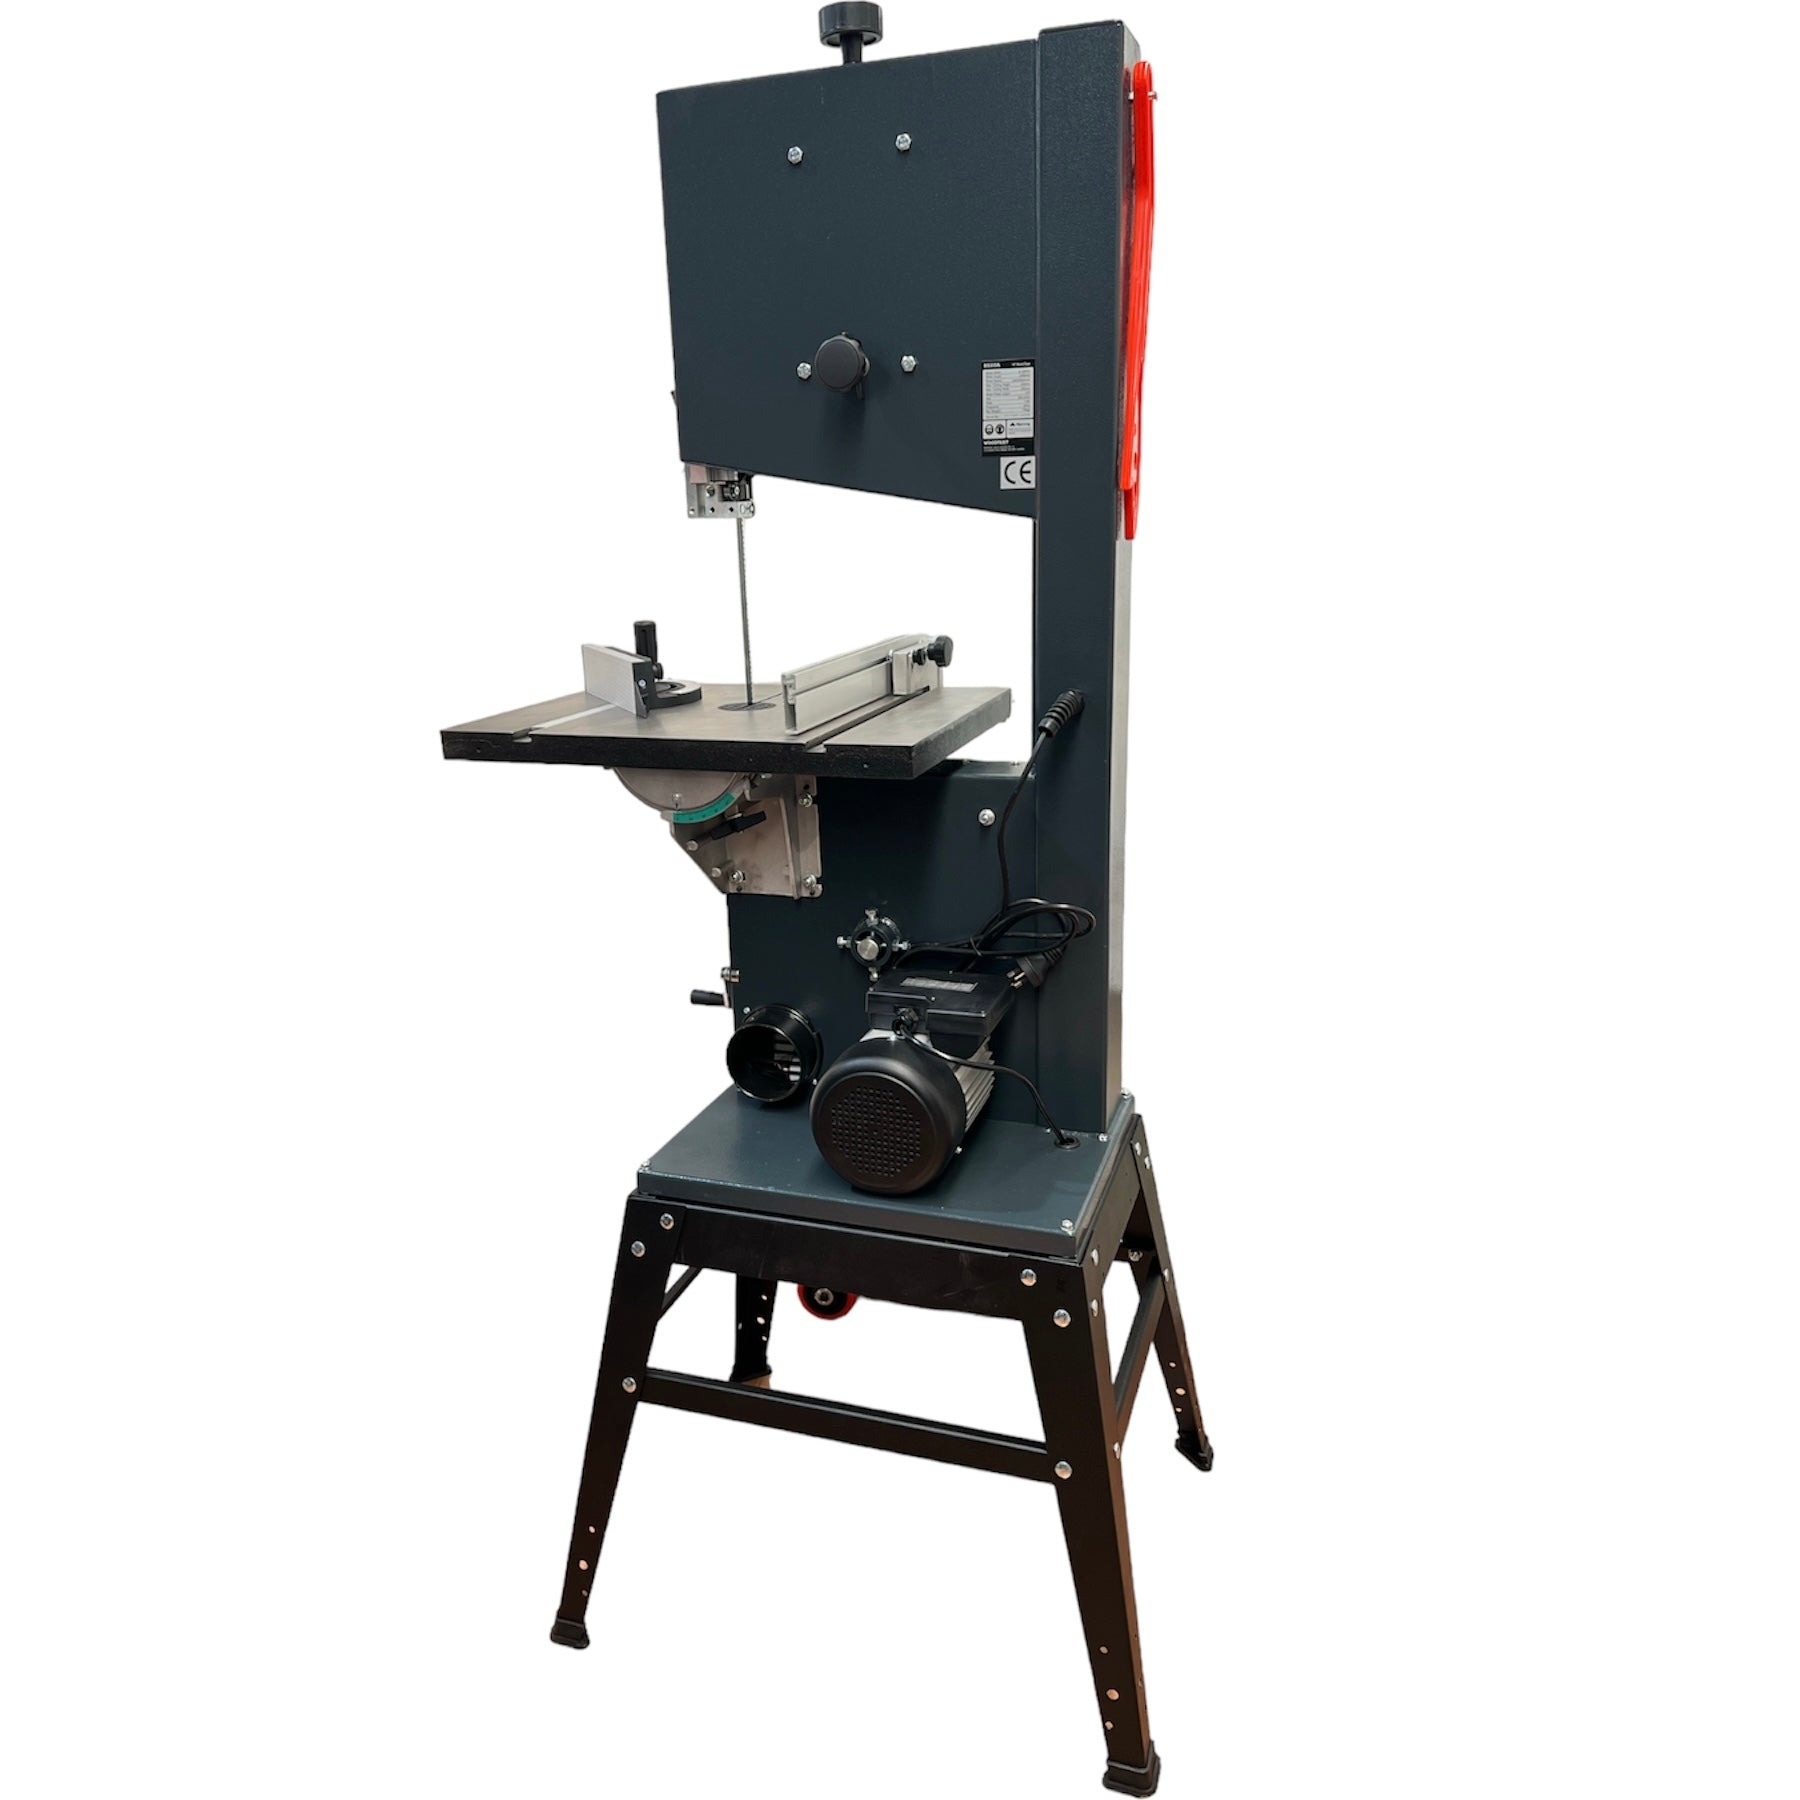 350mm (14") Bandsaw 1HP 240V BS350A by Woodfast *New Arrival*